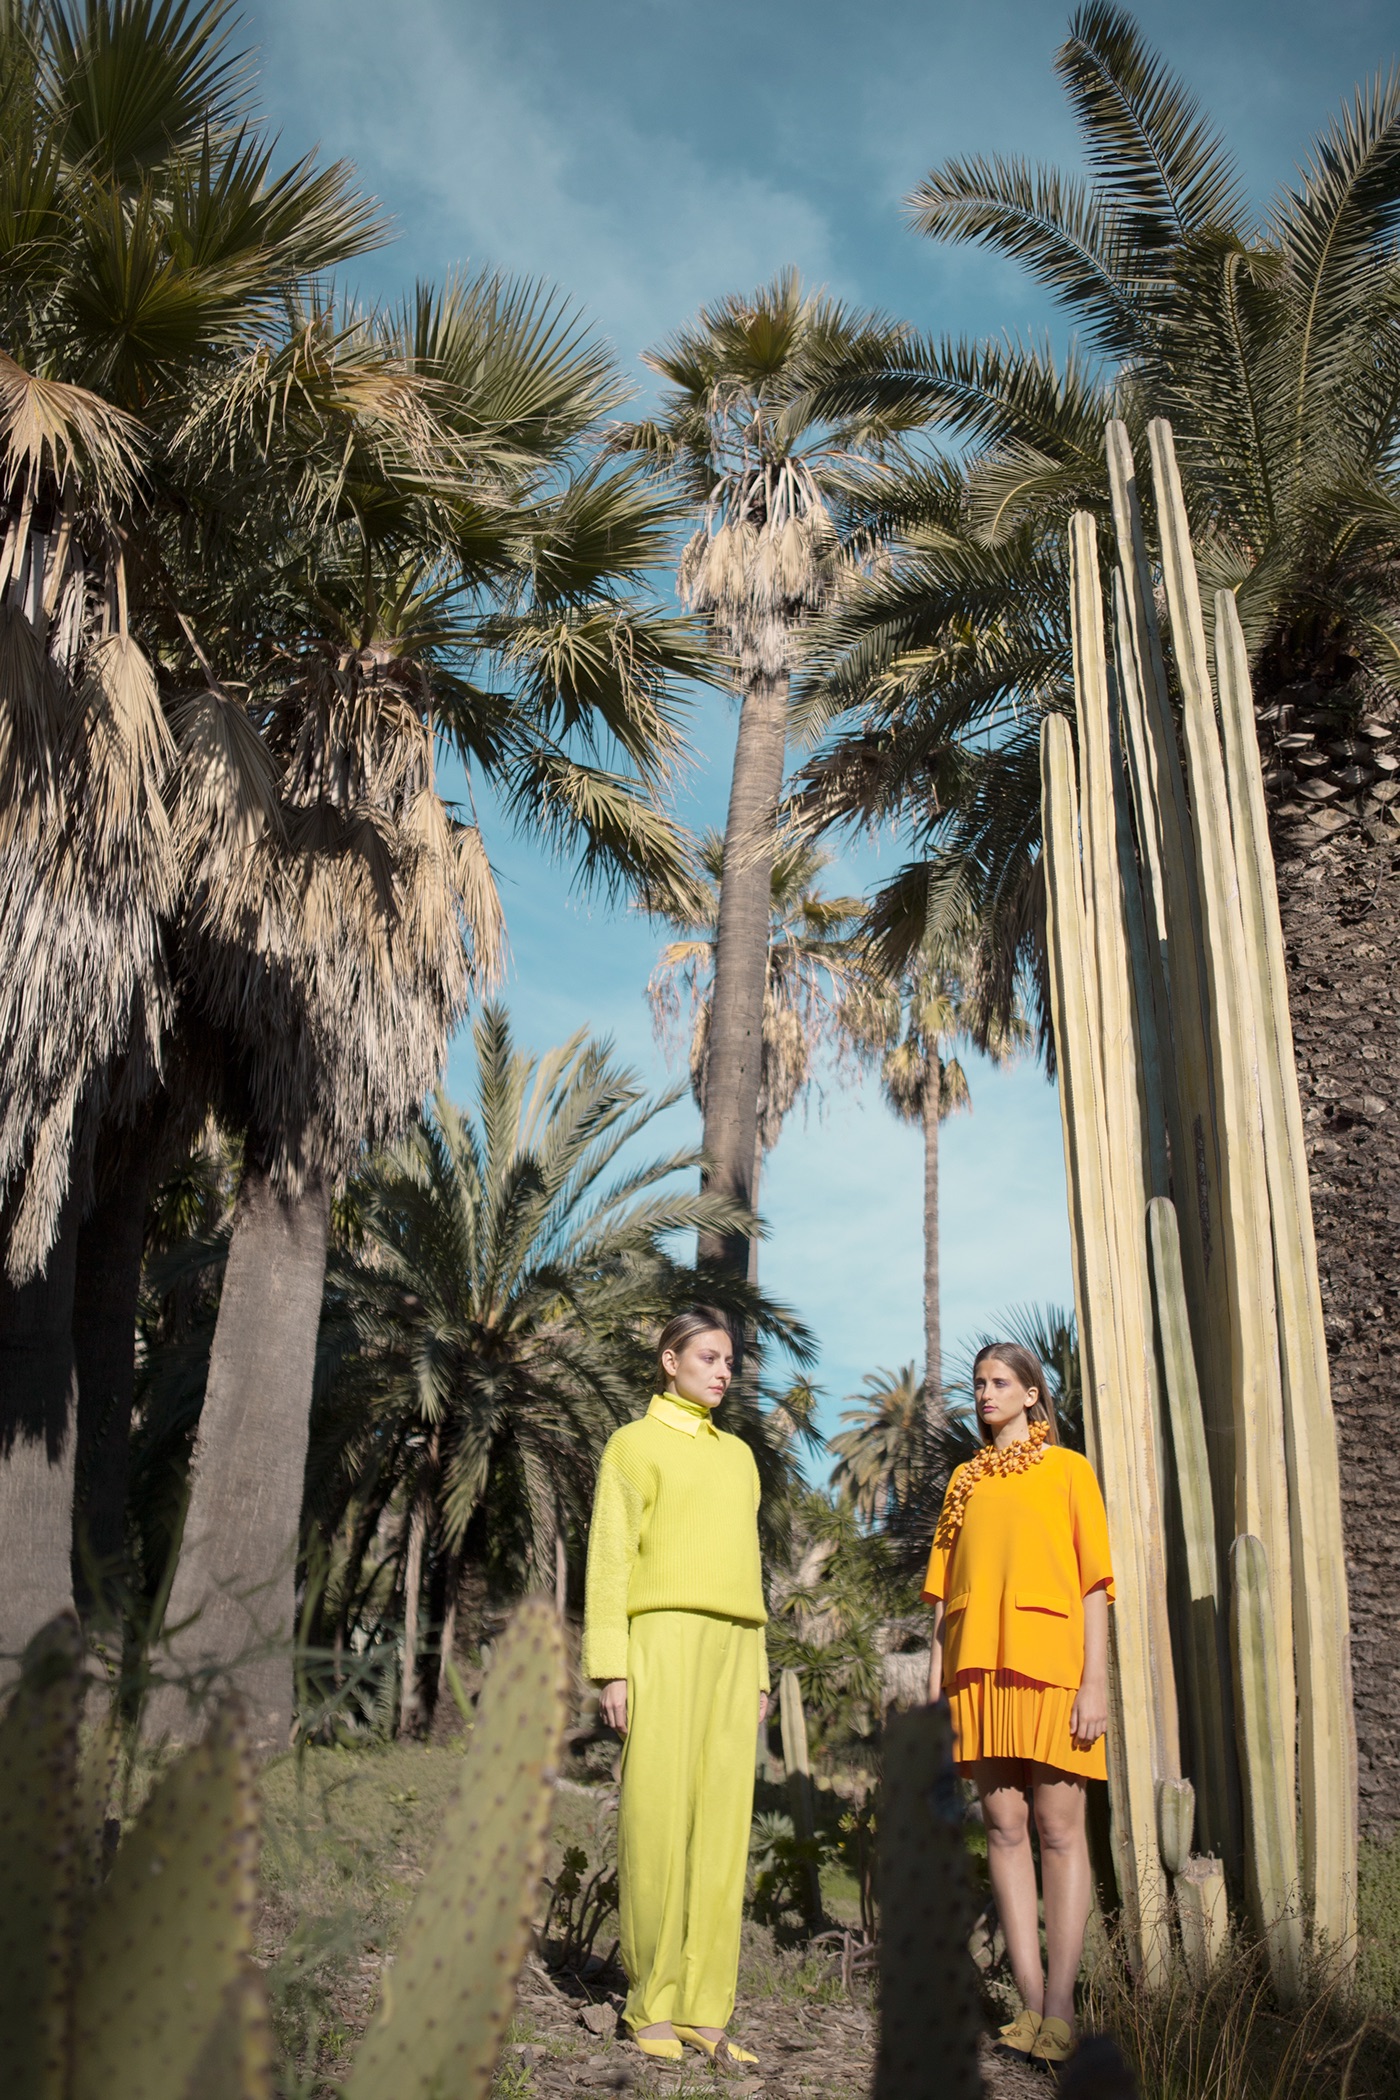 cactus model models photo fashion editorial editorial barcelona garden surreal cos & other sories Beautiful Style